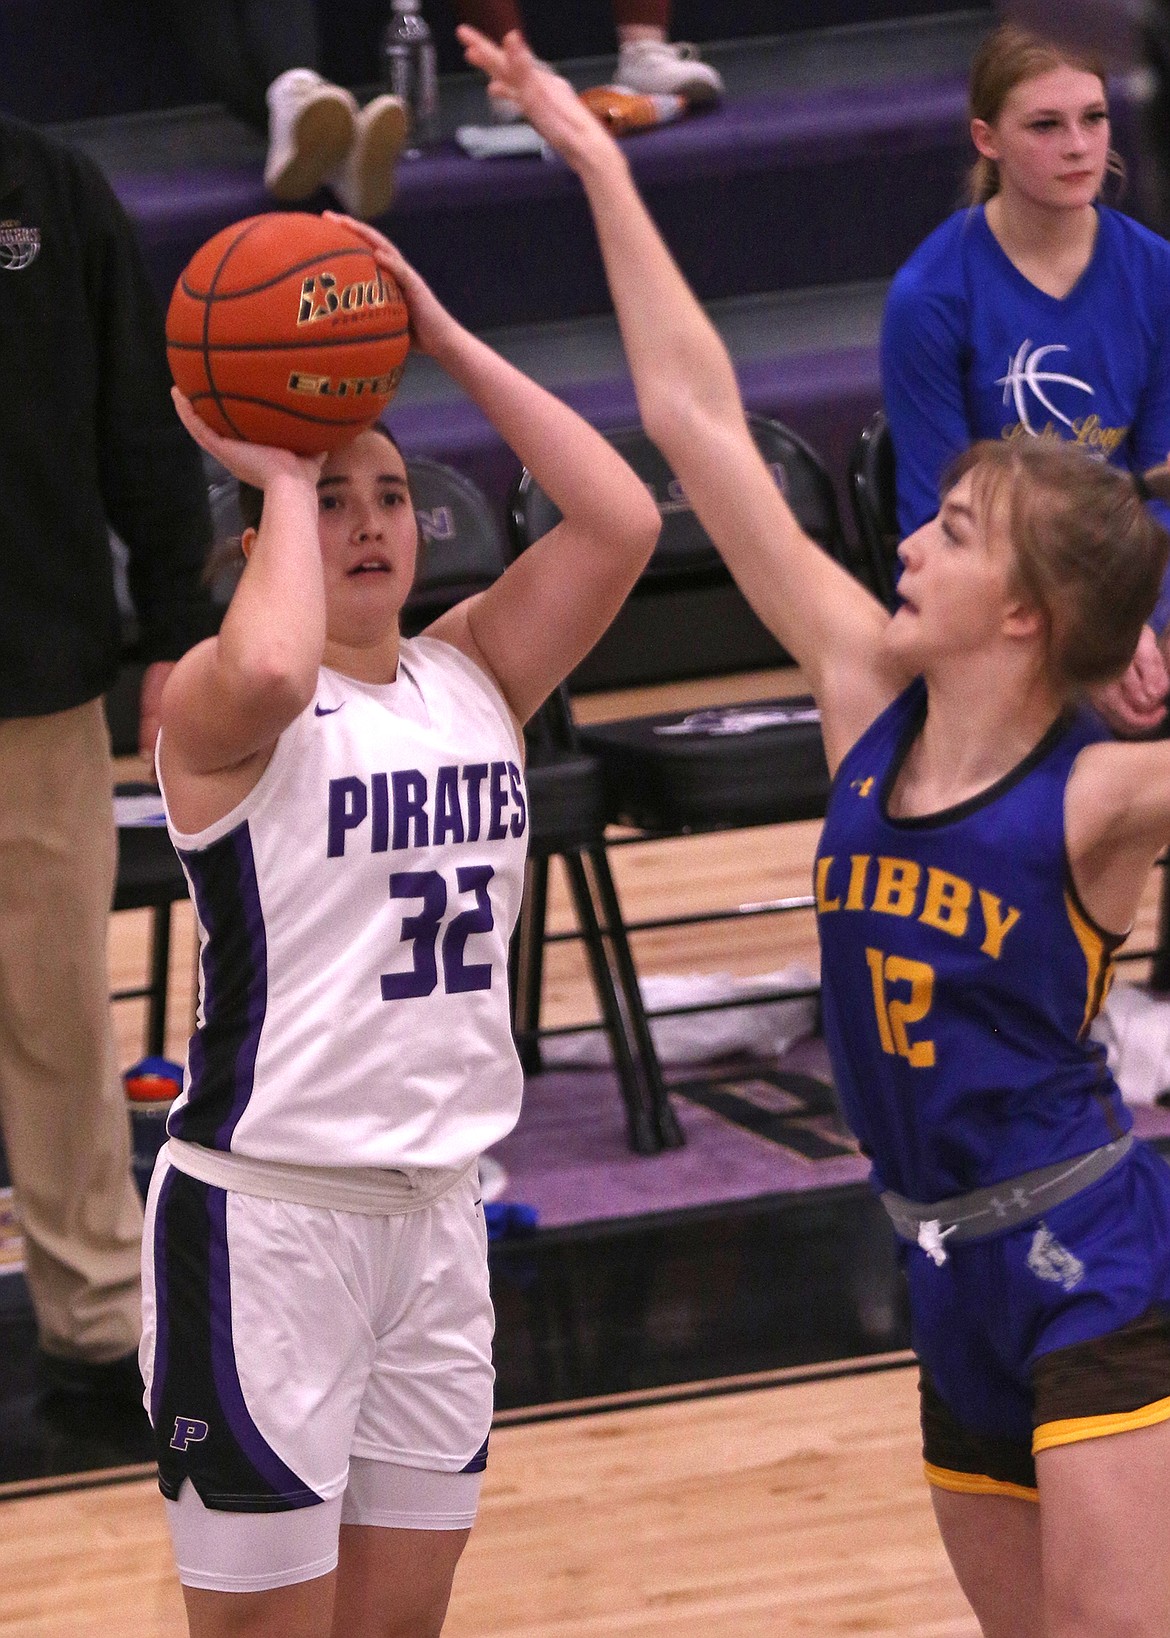 Lady Pirate Mila Hawk takes a jump shot during Saturday's home game against the Libby Loggers. (Bob Gunderson photo)